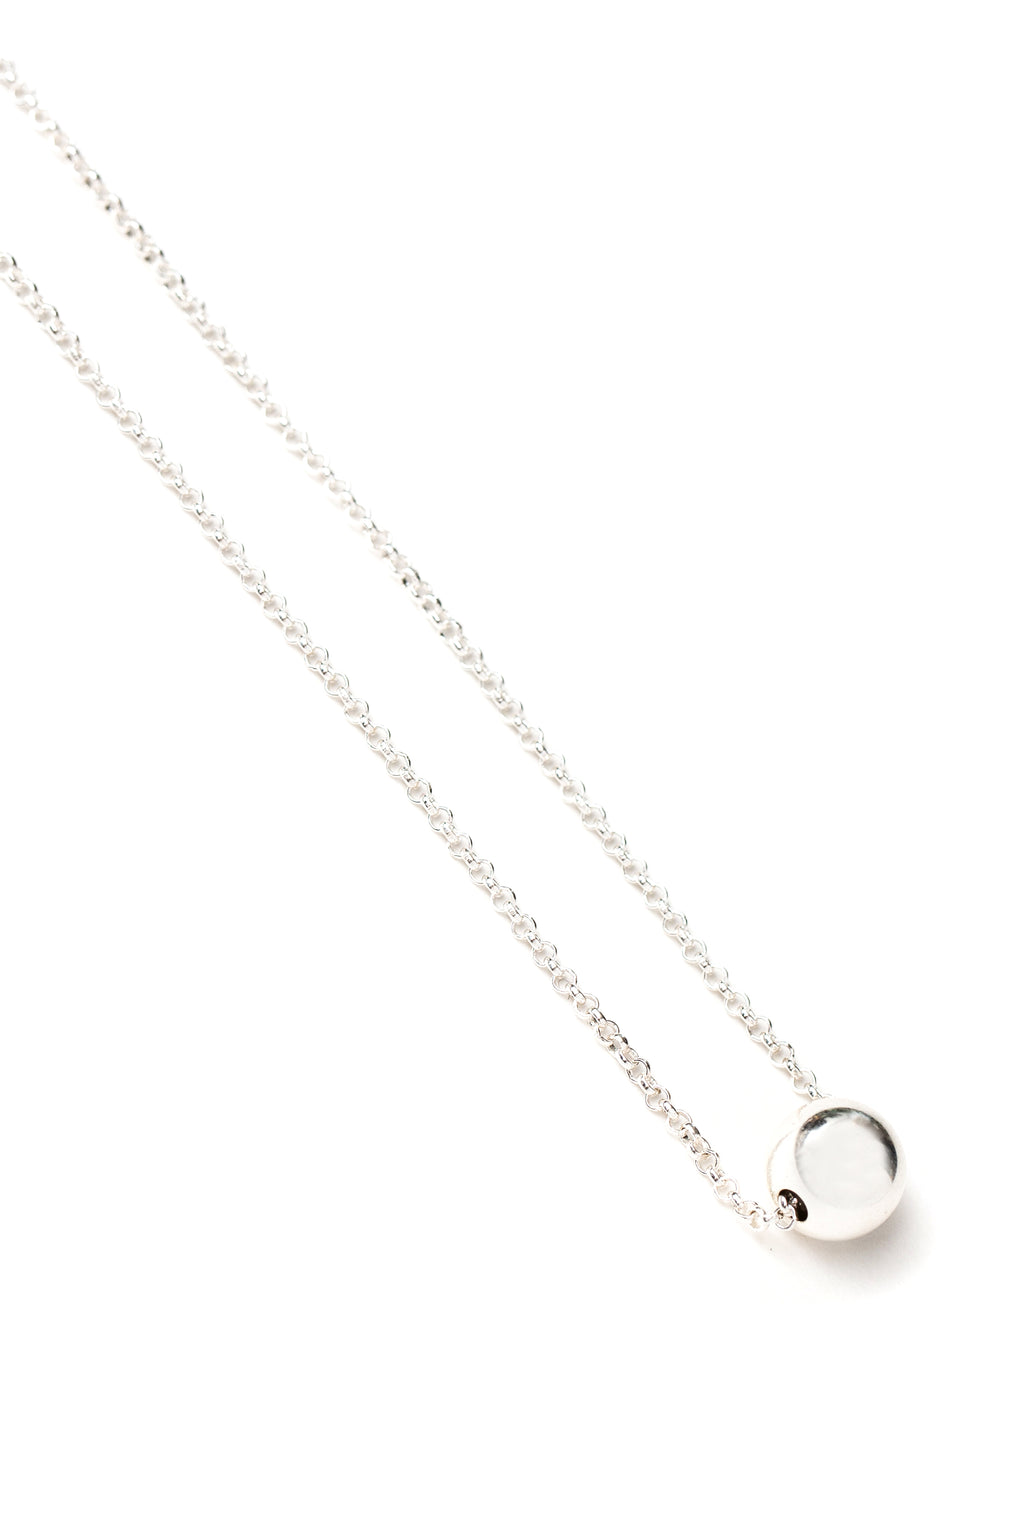 CAT LUCK Small Silver Orb Necklace